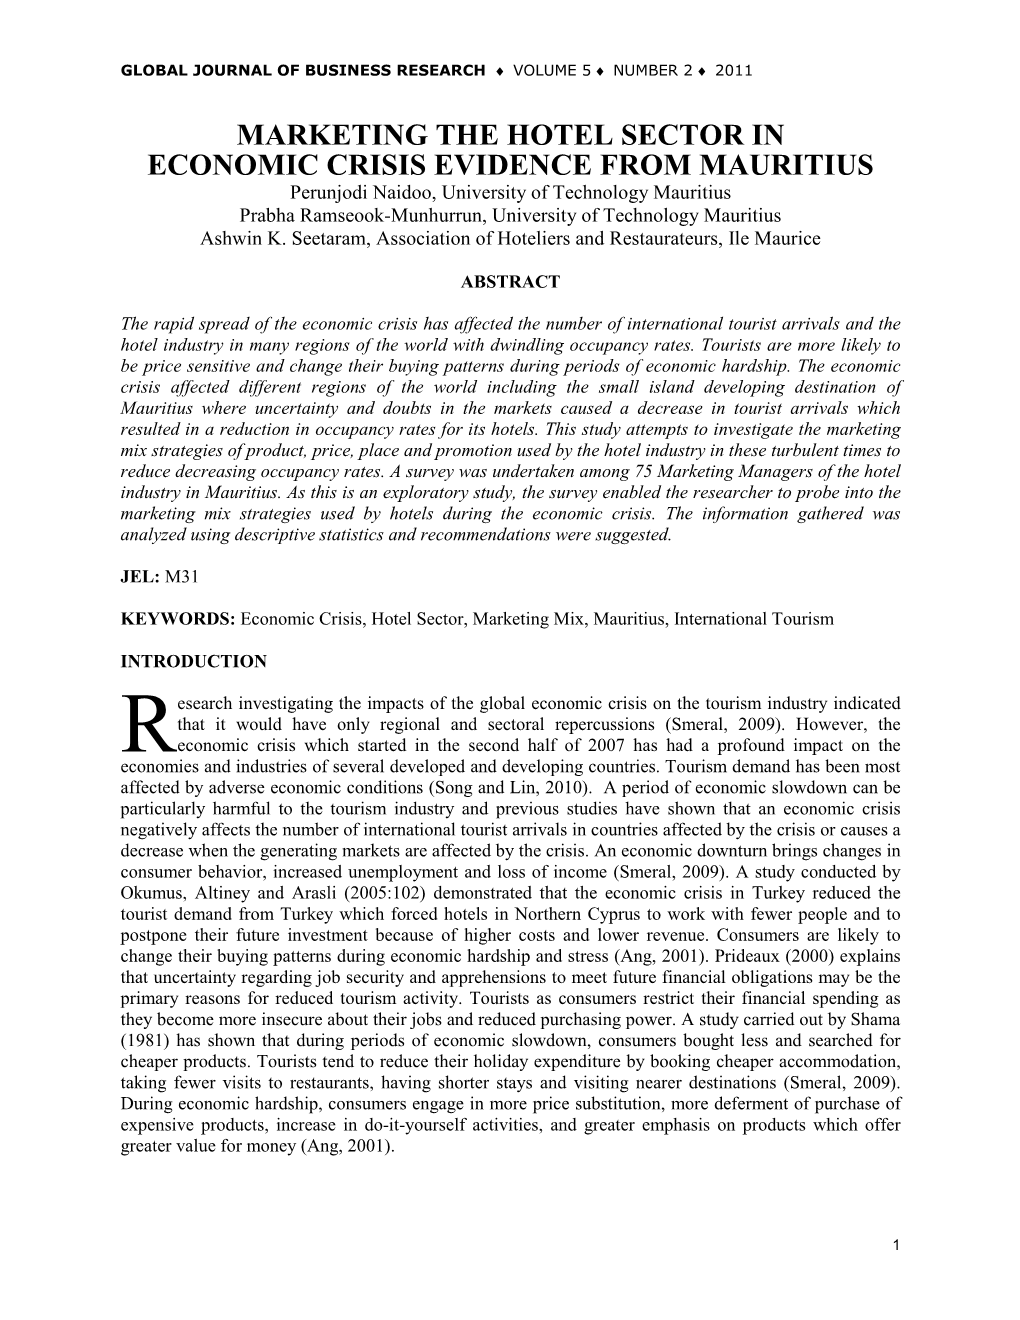 Marketing the Hotel Sector in Economic Crisis Evidence from Mauritius